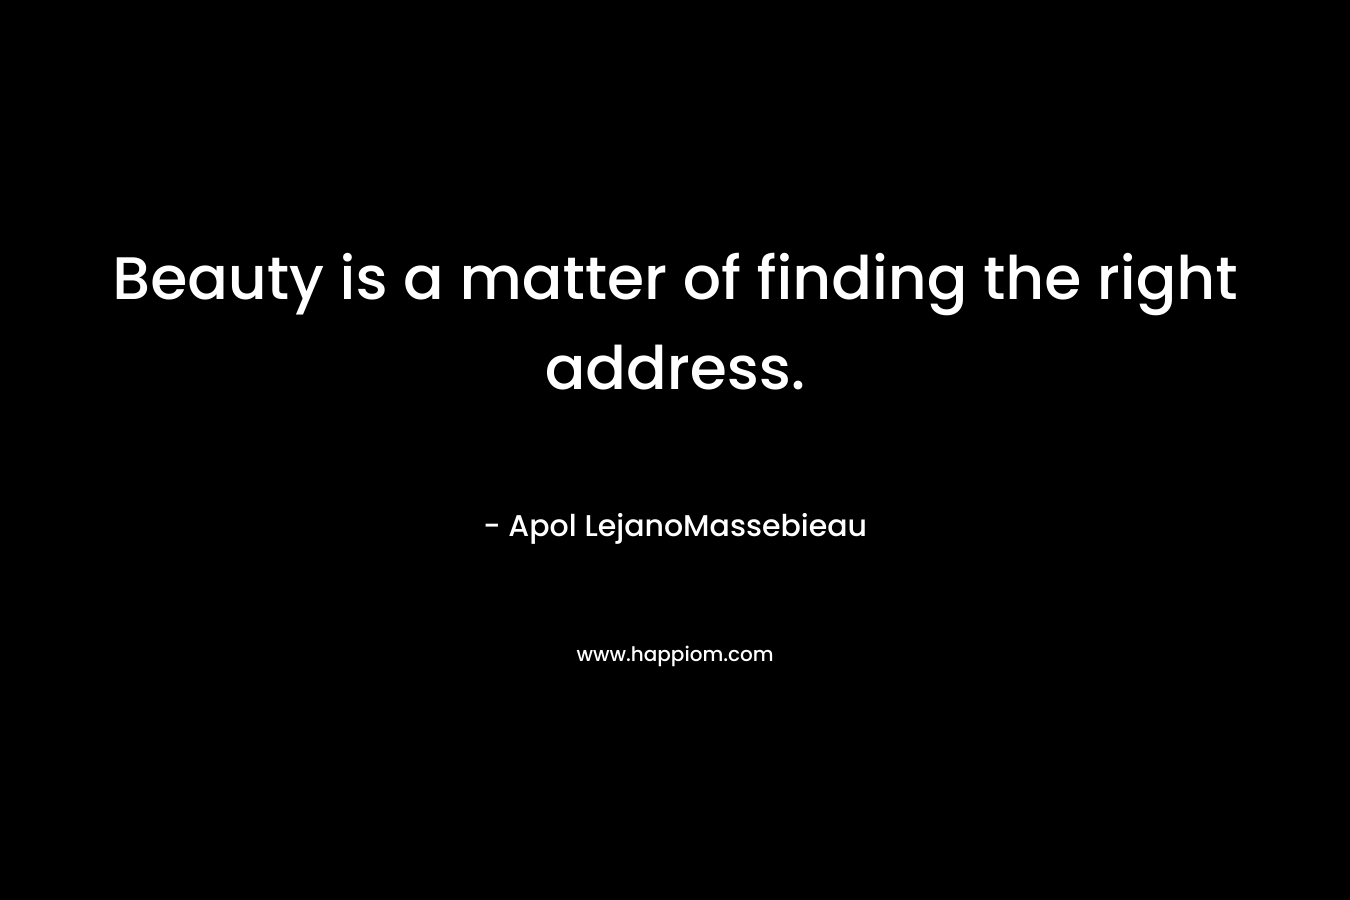 Beauty is a matter of finding the right address.